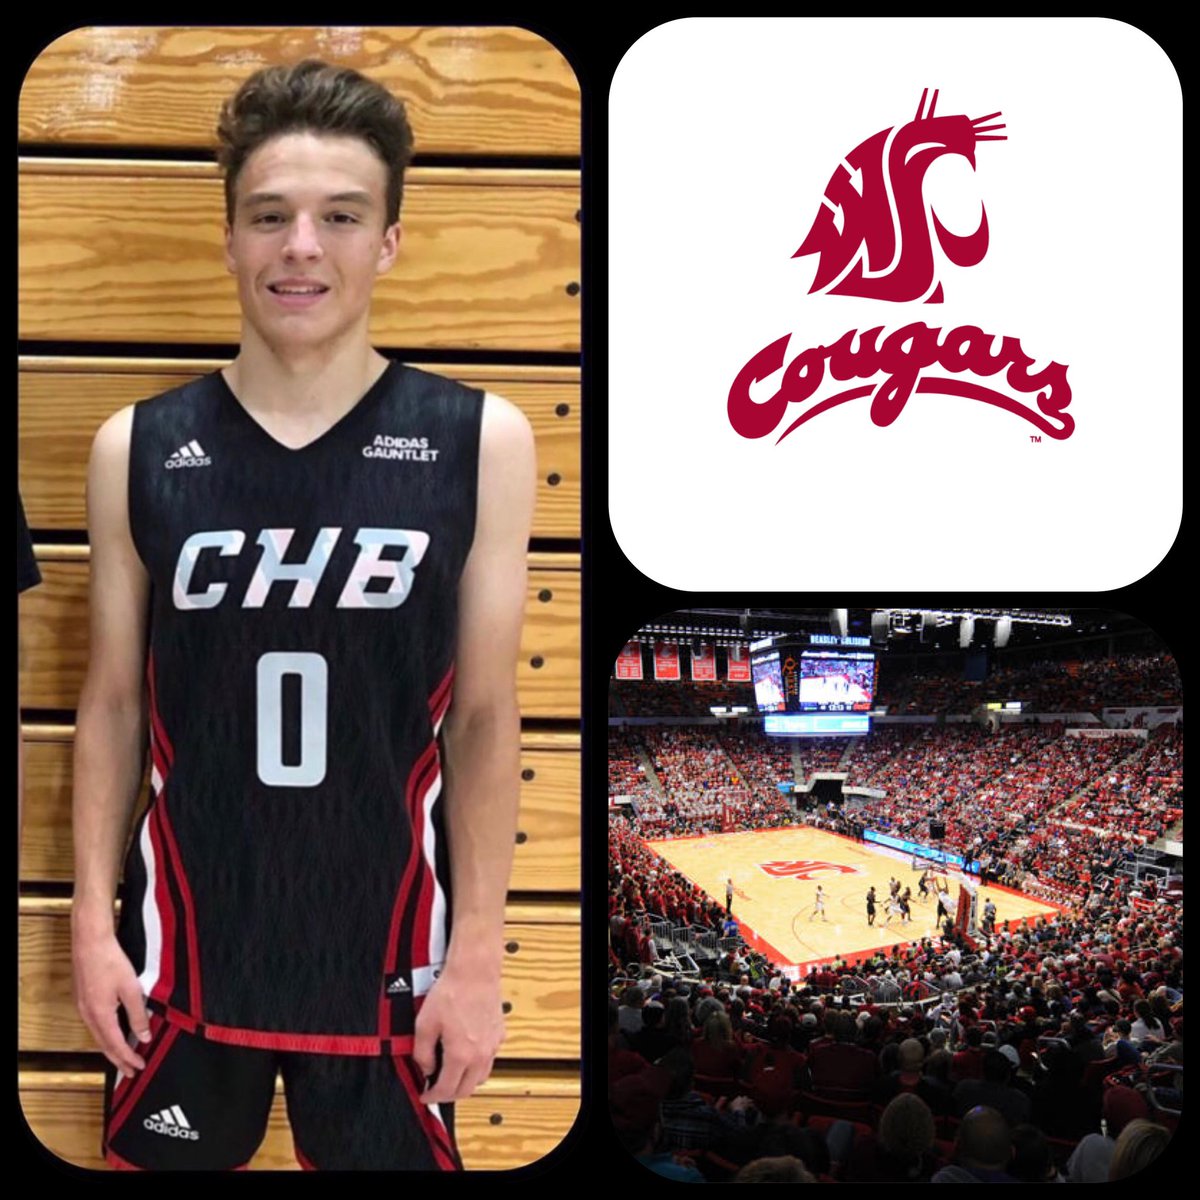 Congrats to 2021 G Cole Anderson (@Cole3Anderson) of @ClovisWestBask1 on receiving an offer from Coach Smith and the PAC12 Washington State Cougars (@WSUCougarMBB). Cole’s off to a great start this season and the offers and interest keeps growing! #chb #letswork #proveit